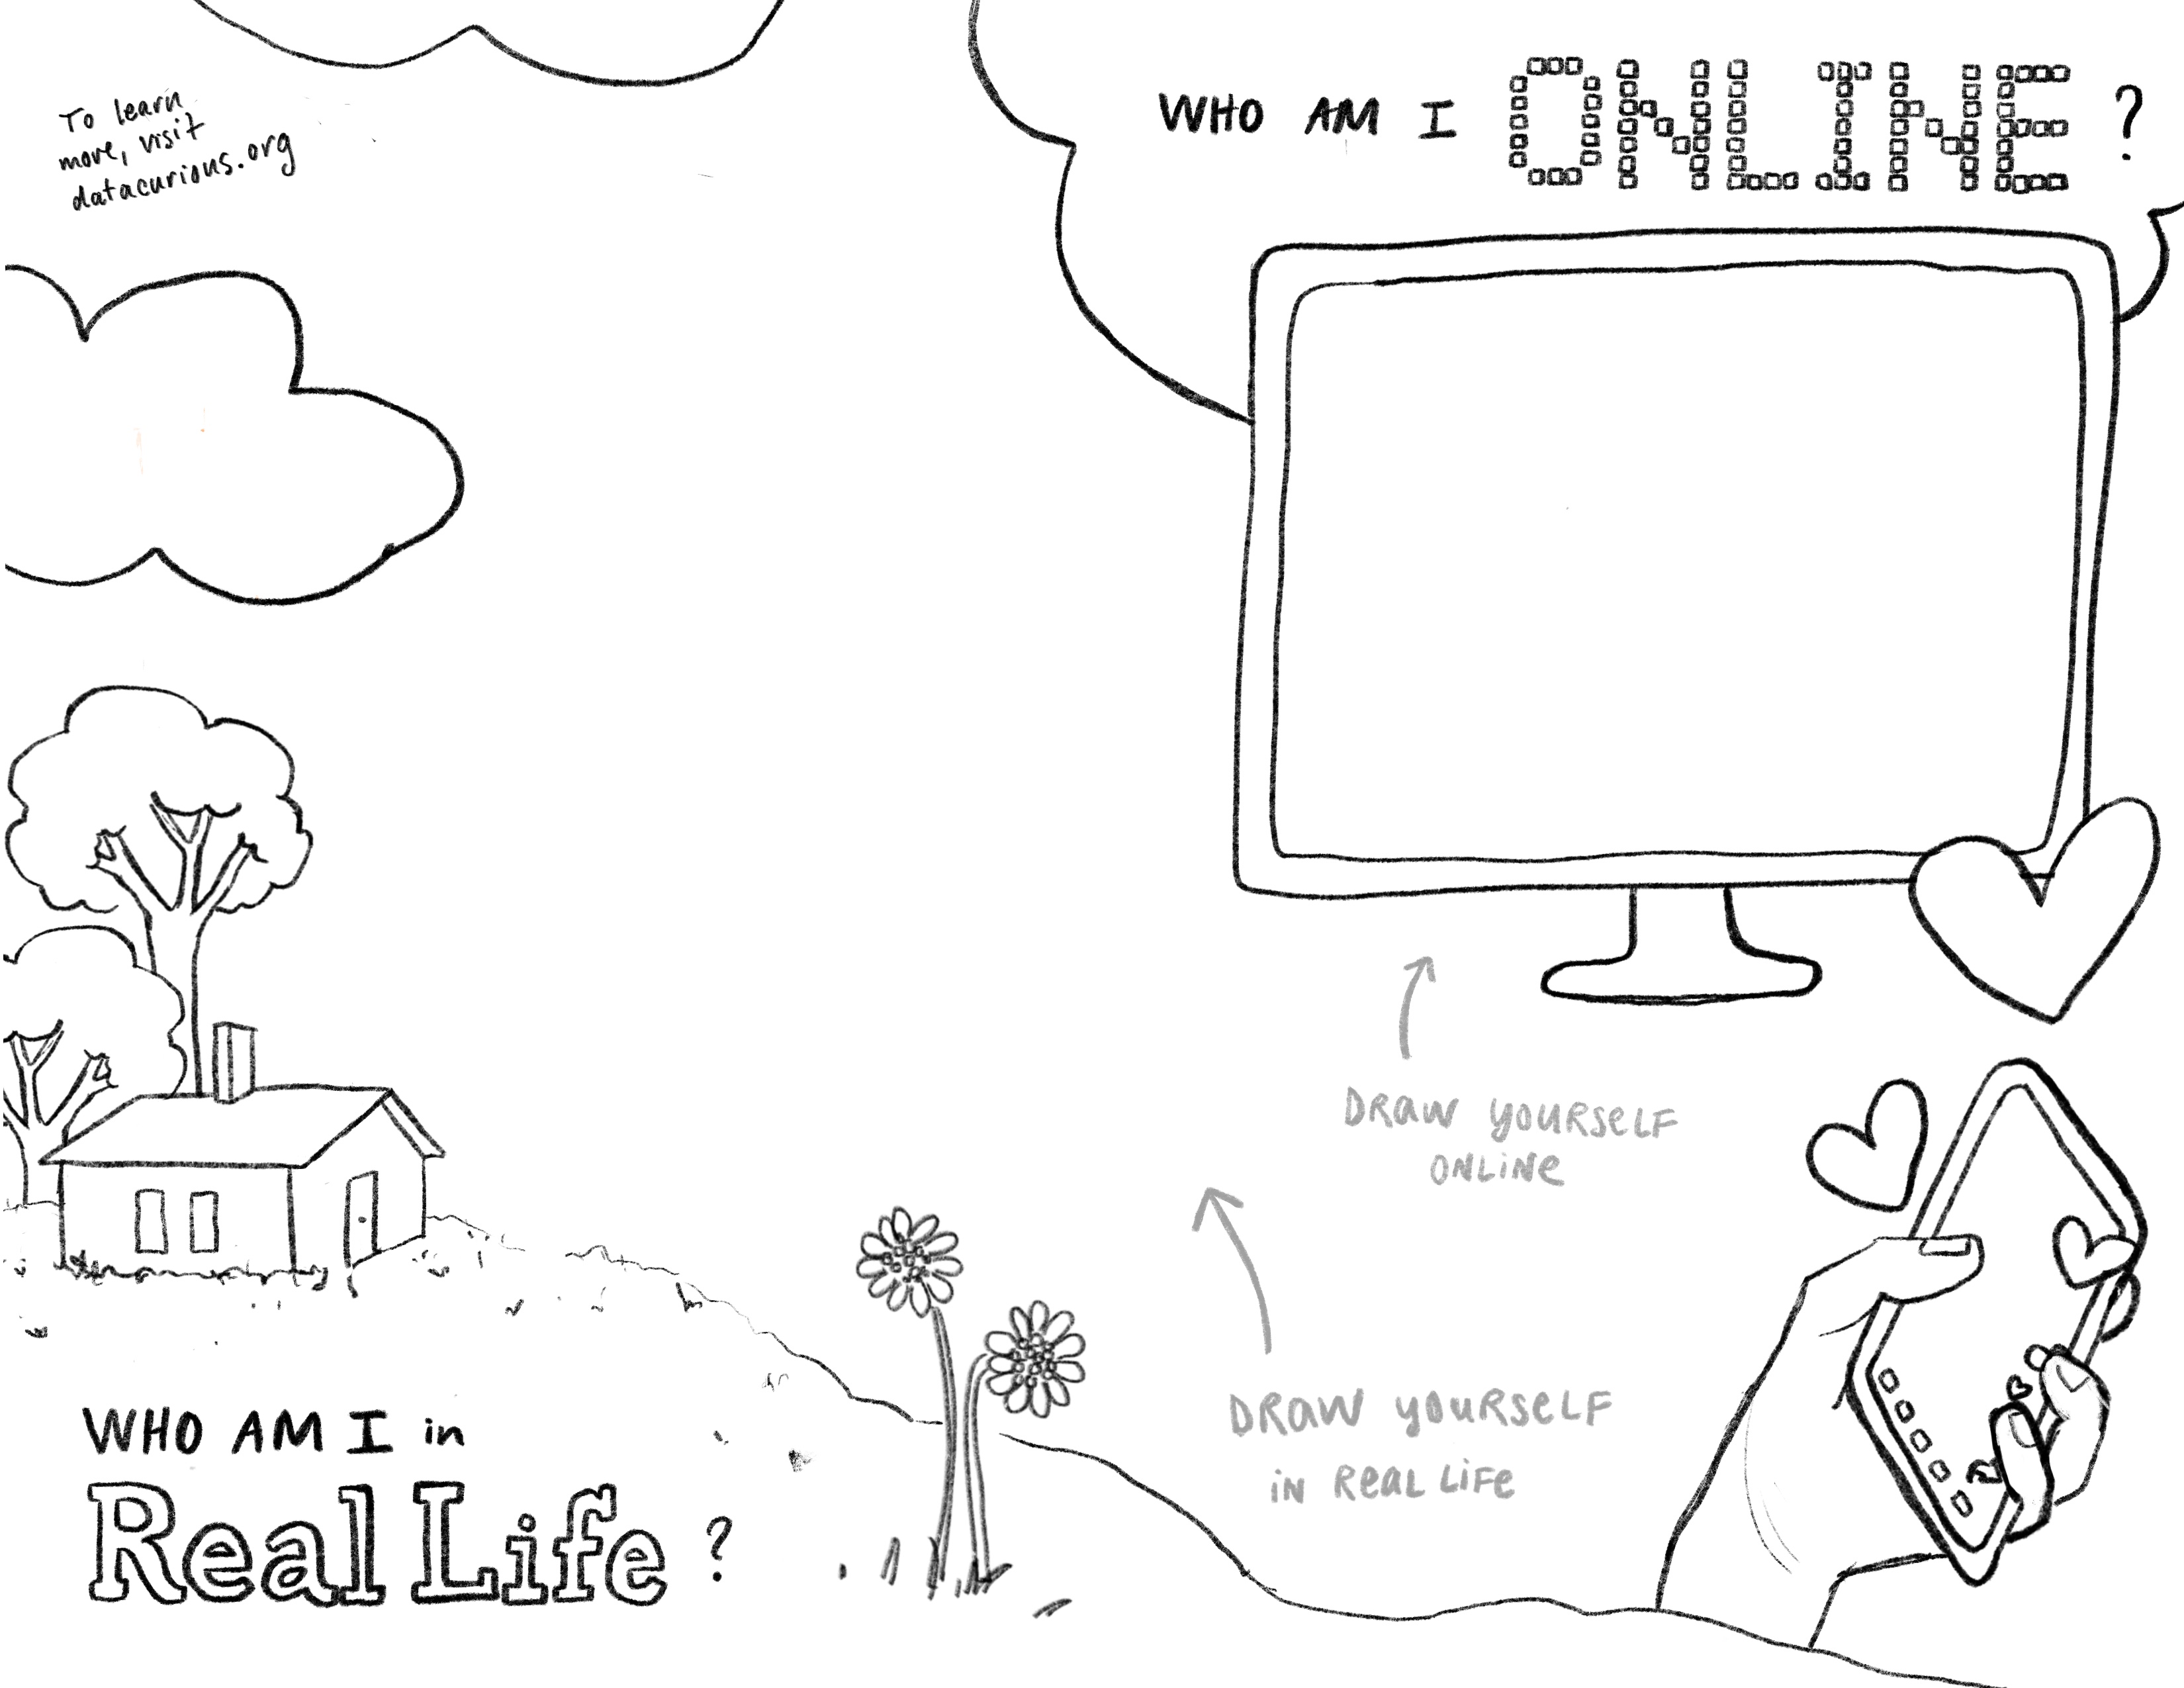 A black and white coloring page asks, “Who am I in Real Life?” on the left side of the page with an outdoor scene of a house, trees, clouds, and flowers. On the right side, “Who am I Online?” is written above a blank computer screen and a hand holding a phone that emanates hearts from the phone screen.